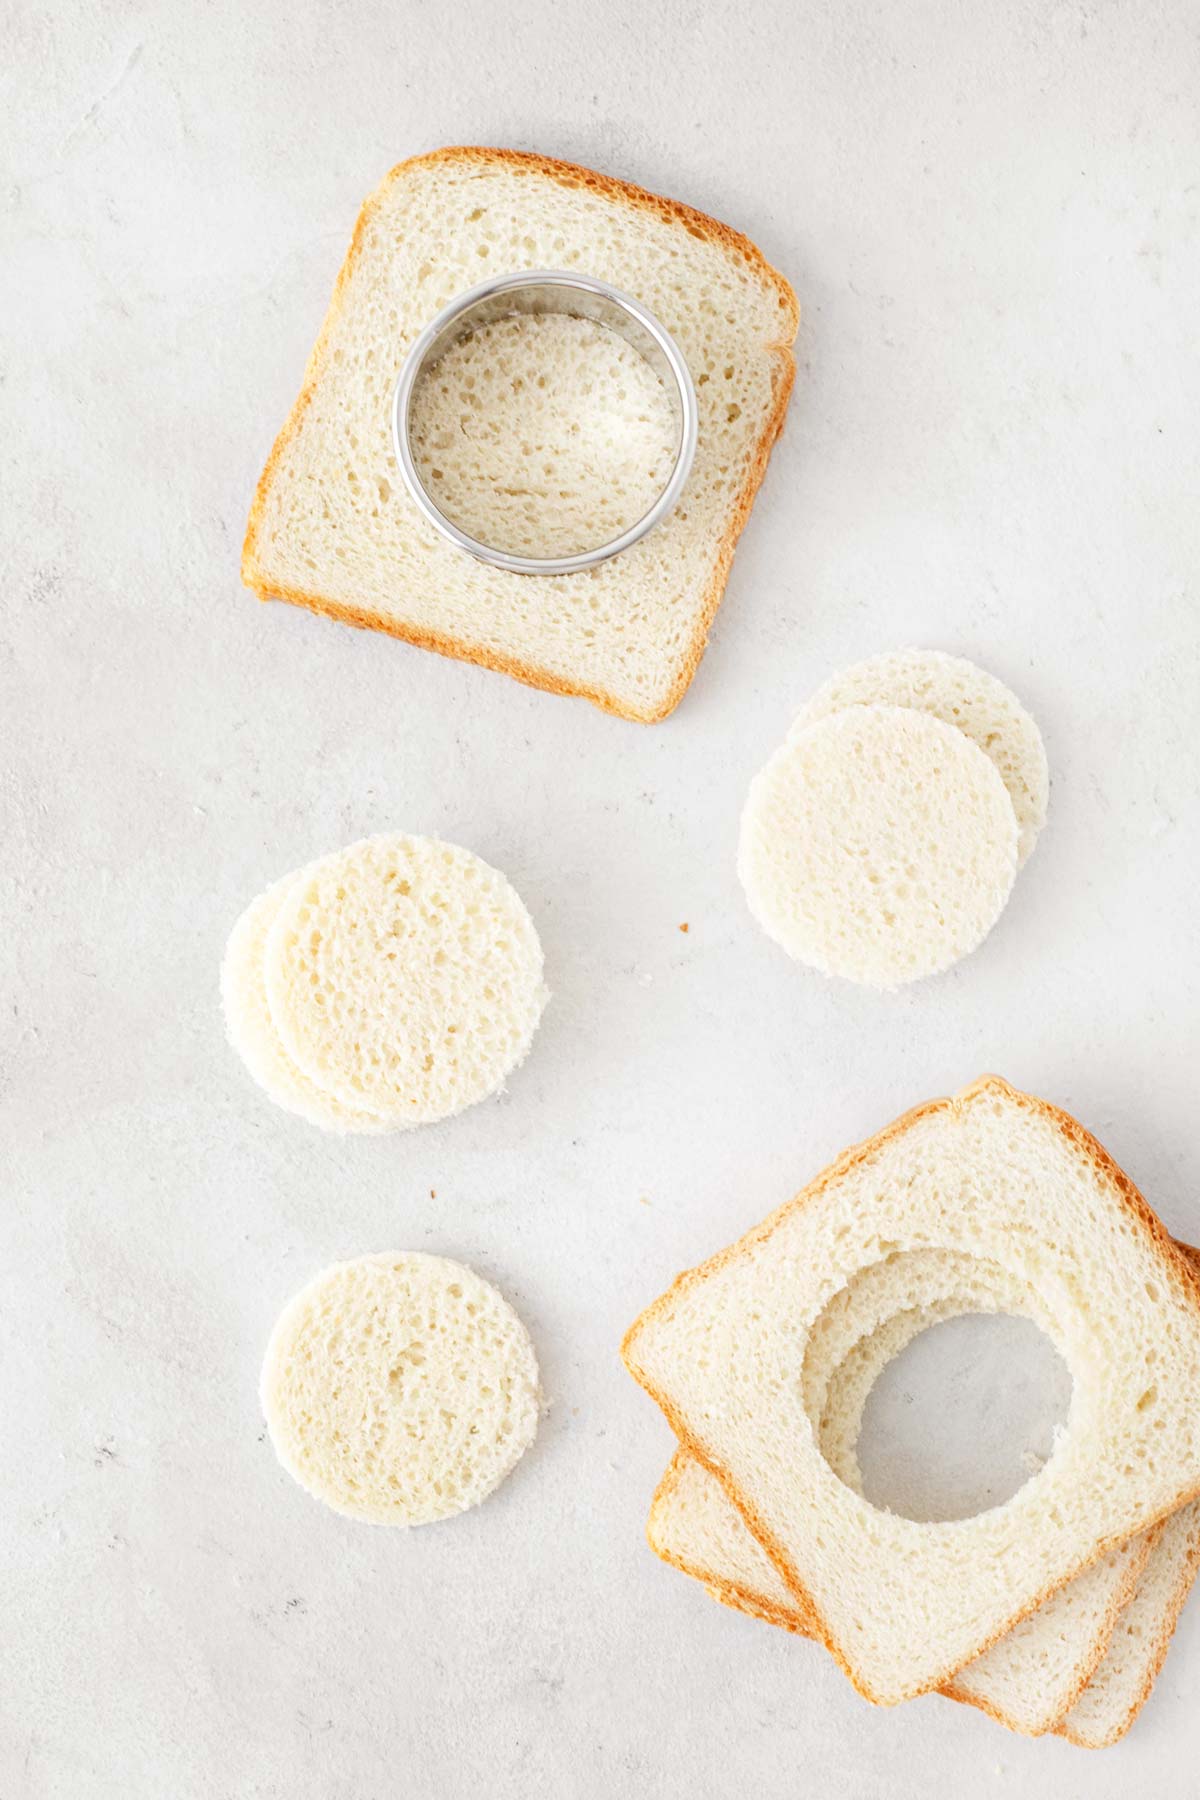 White bread being cut into circles with a round cookie cutter.